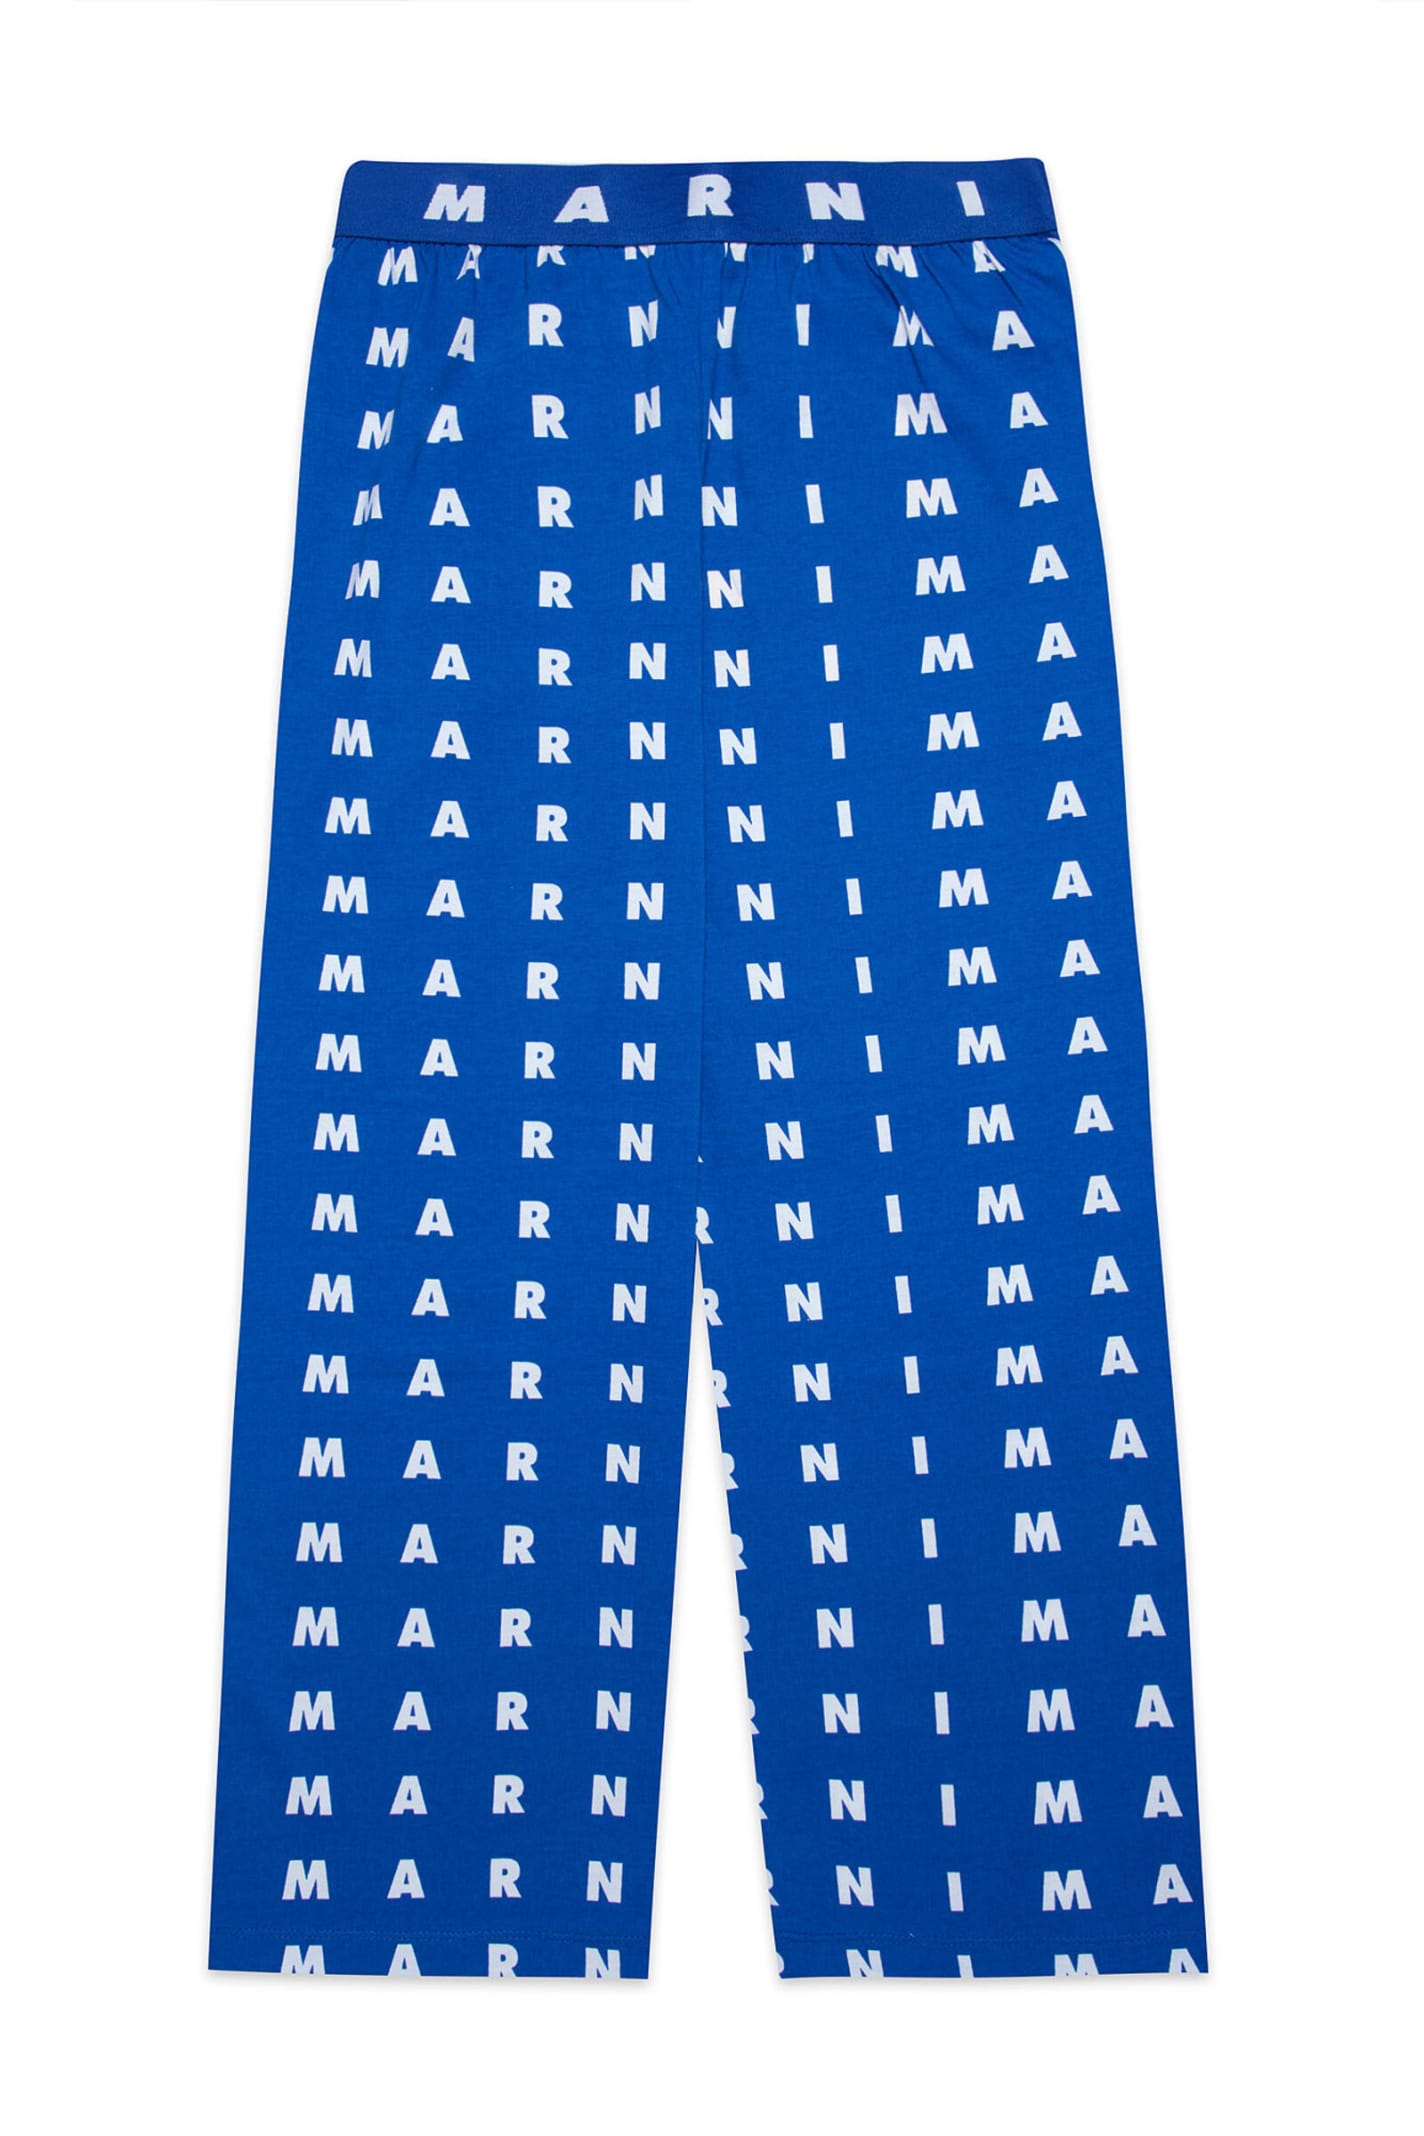 MARNI MP111KF TROUSERS MARNI BLUE JERSEY JOGGING TROUSERS WITH SMALL ALLOVER LOGO